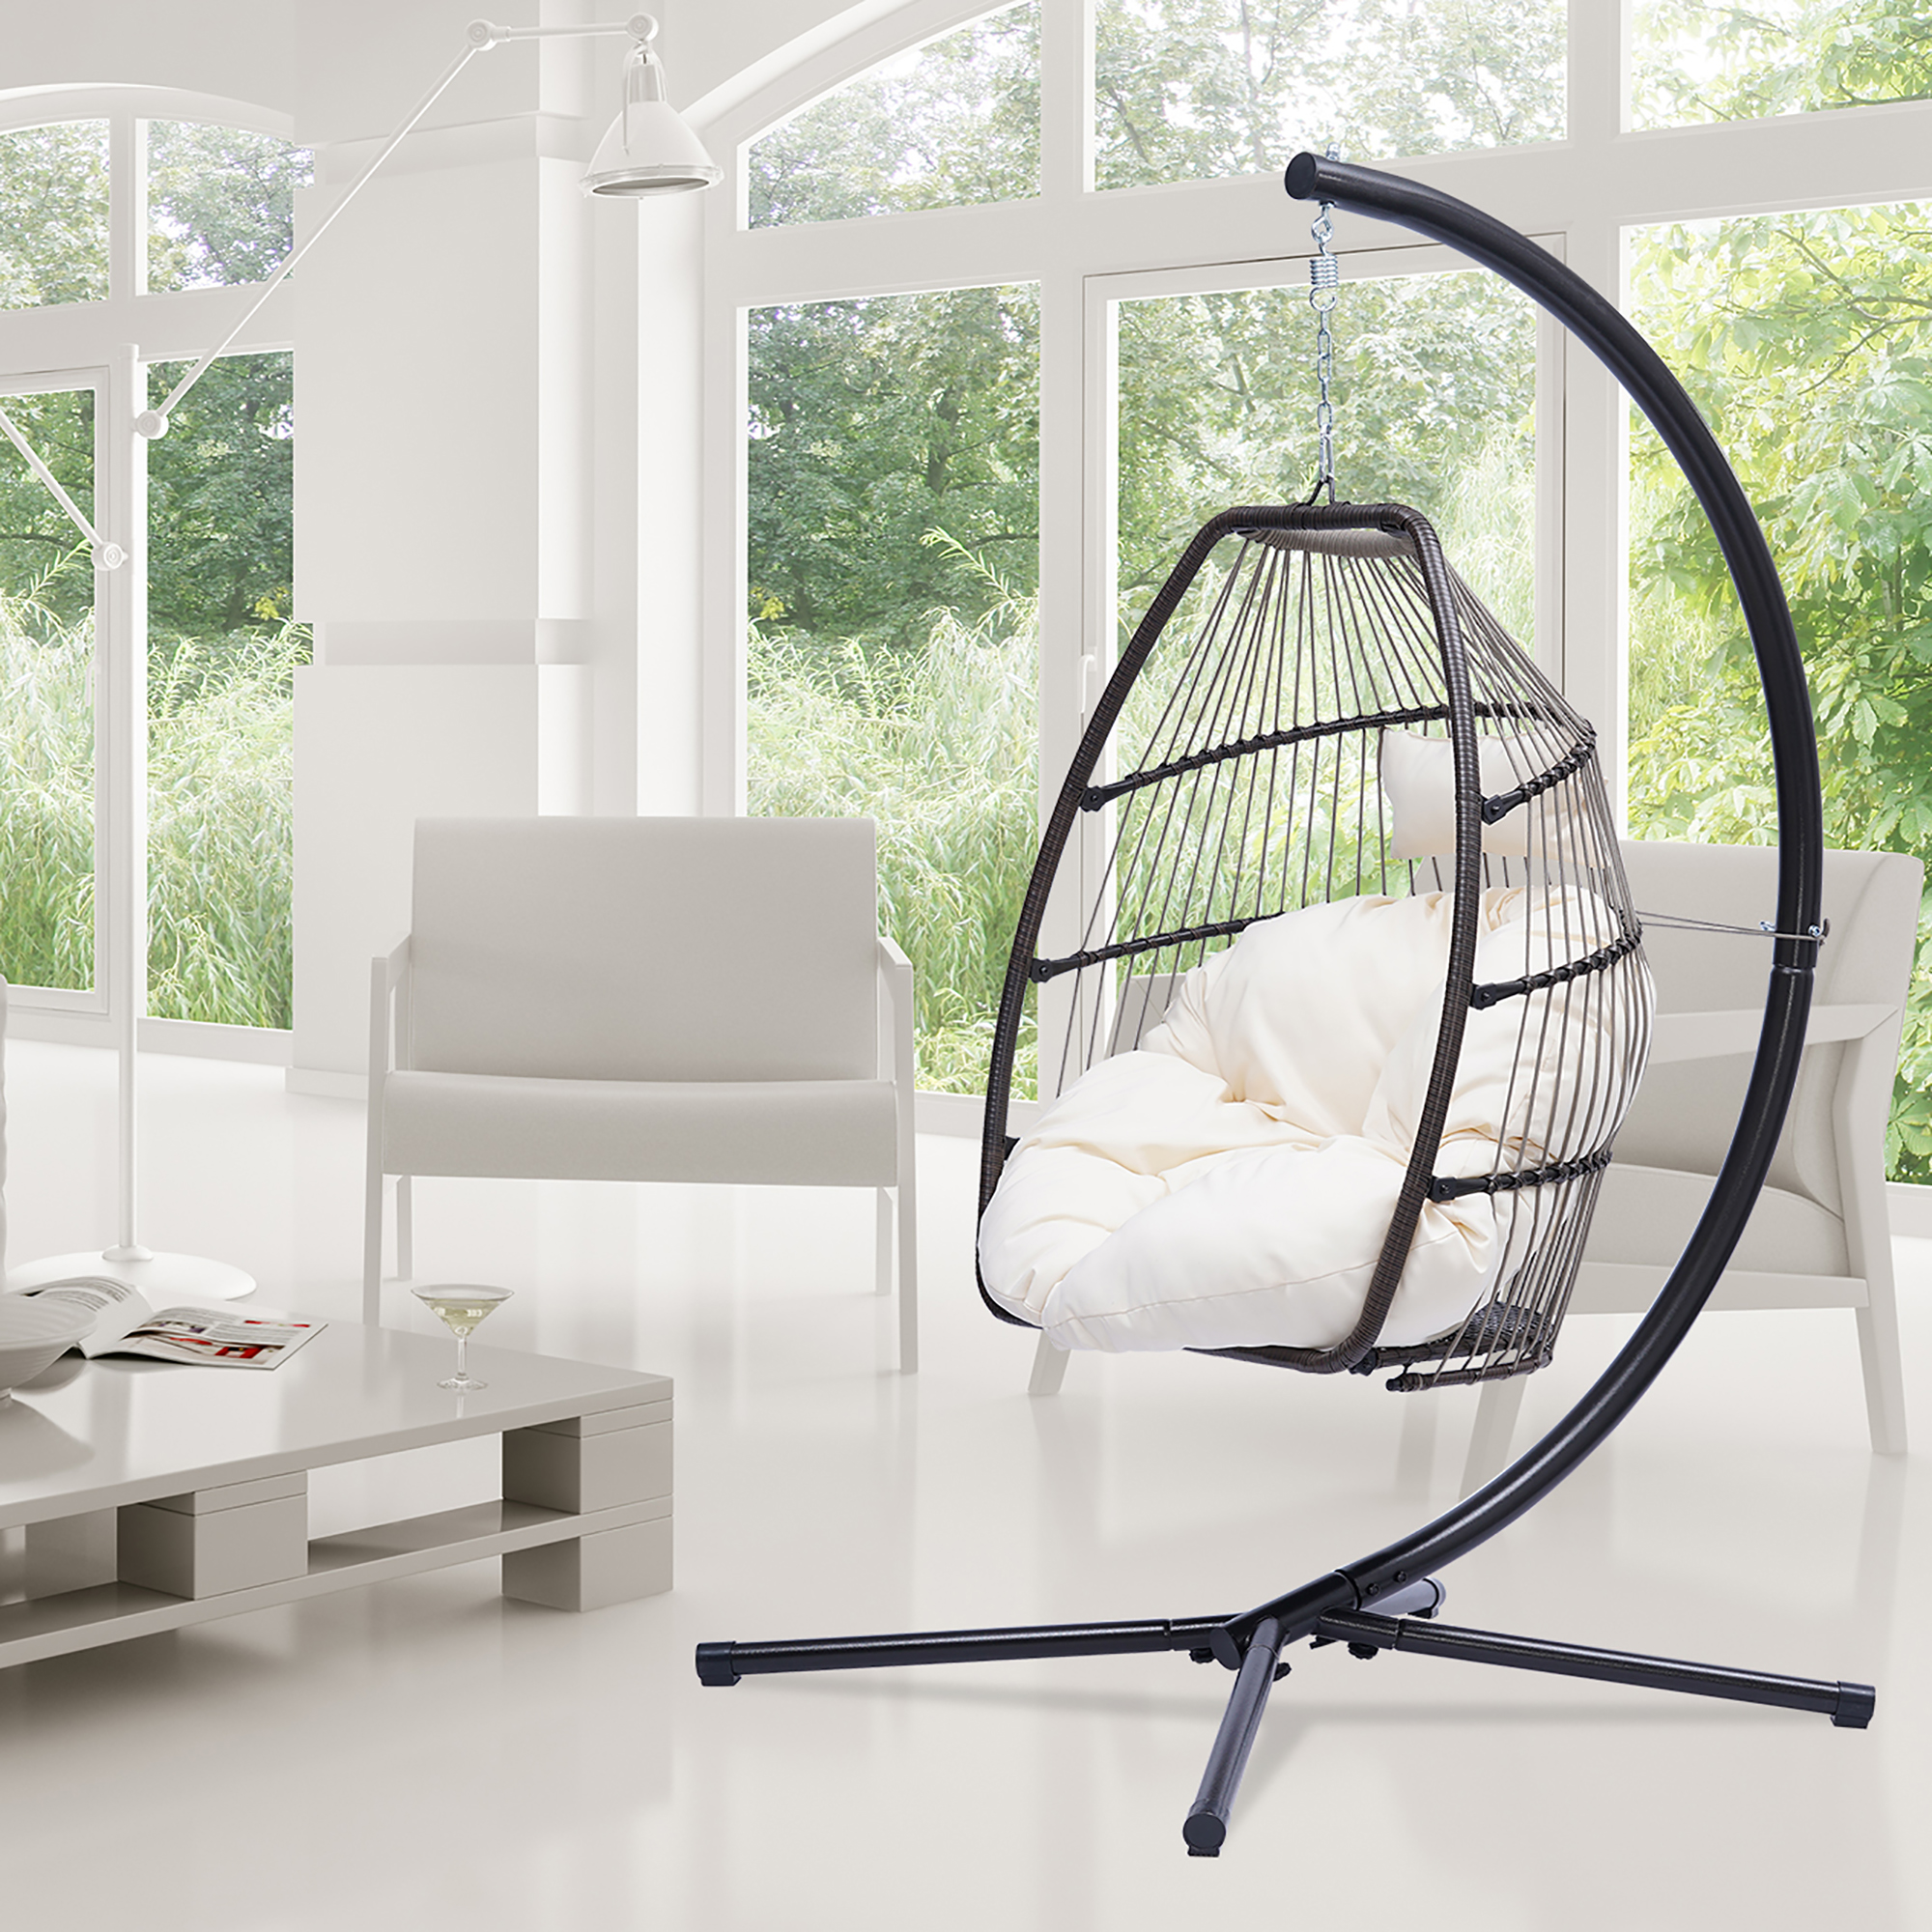 Hanging Chair Swing Egg Chair, Outdoor Rattan Egg Swing Chair, Heavy Duty Hammock Chair with Stand, Cushion and Pillow, Steel Frame Loading 250lbs for Indoor Outdoor Bedroom Patio Garden, B047 - image 3 of 10